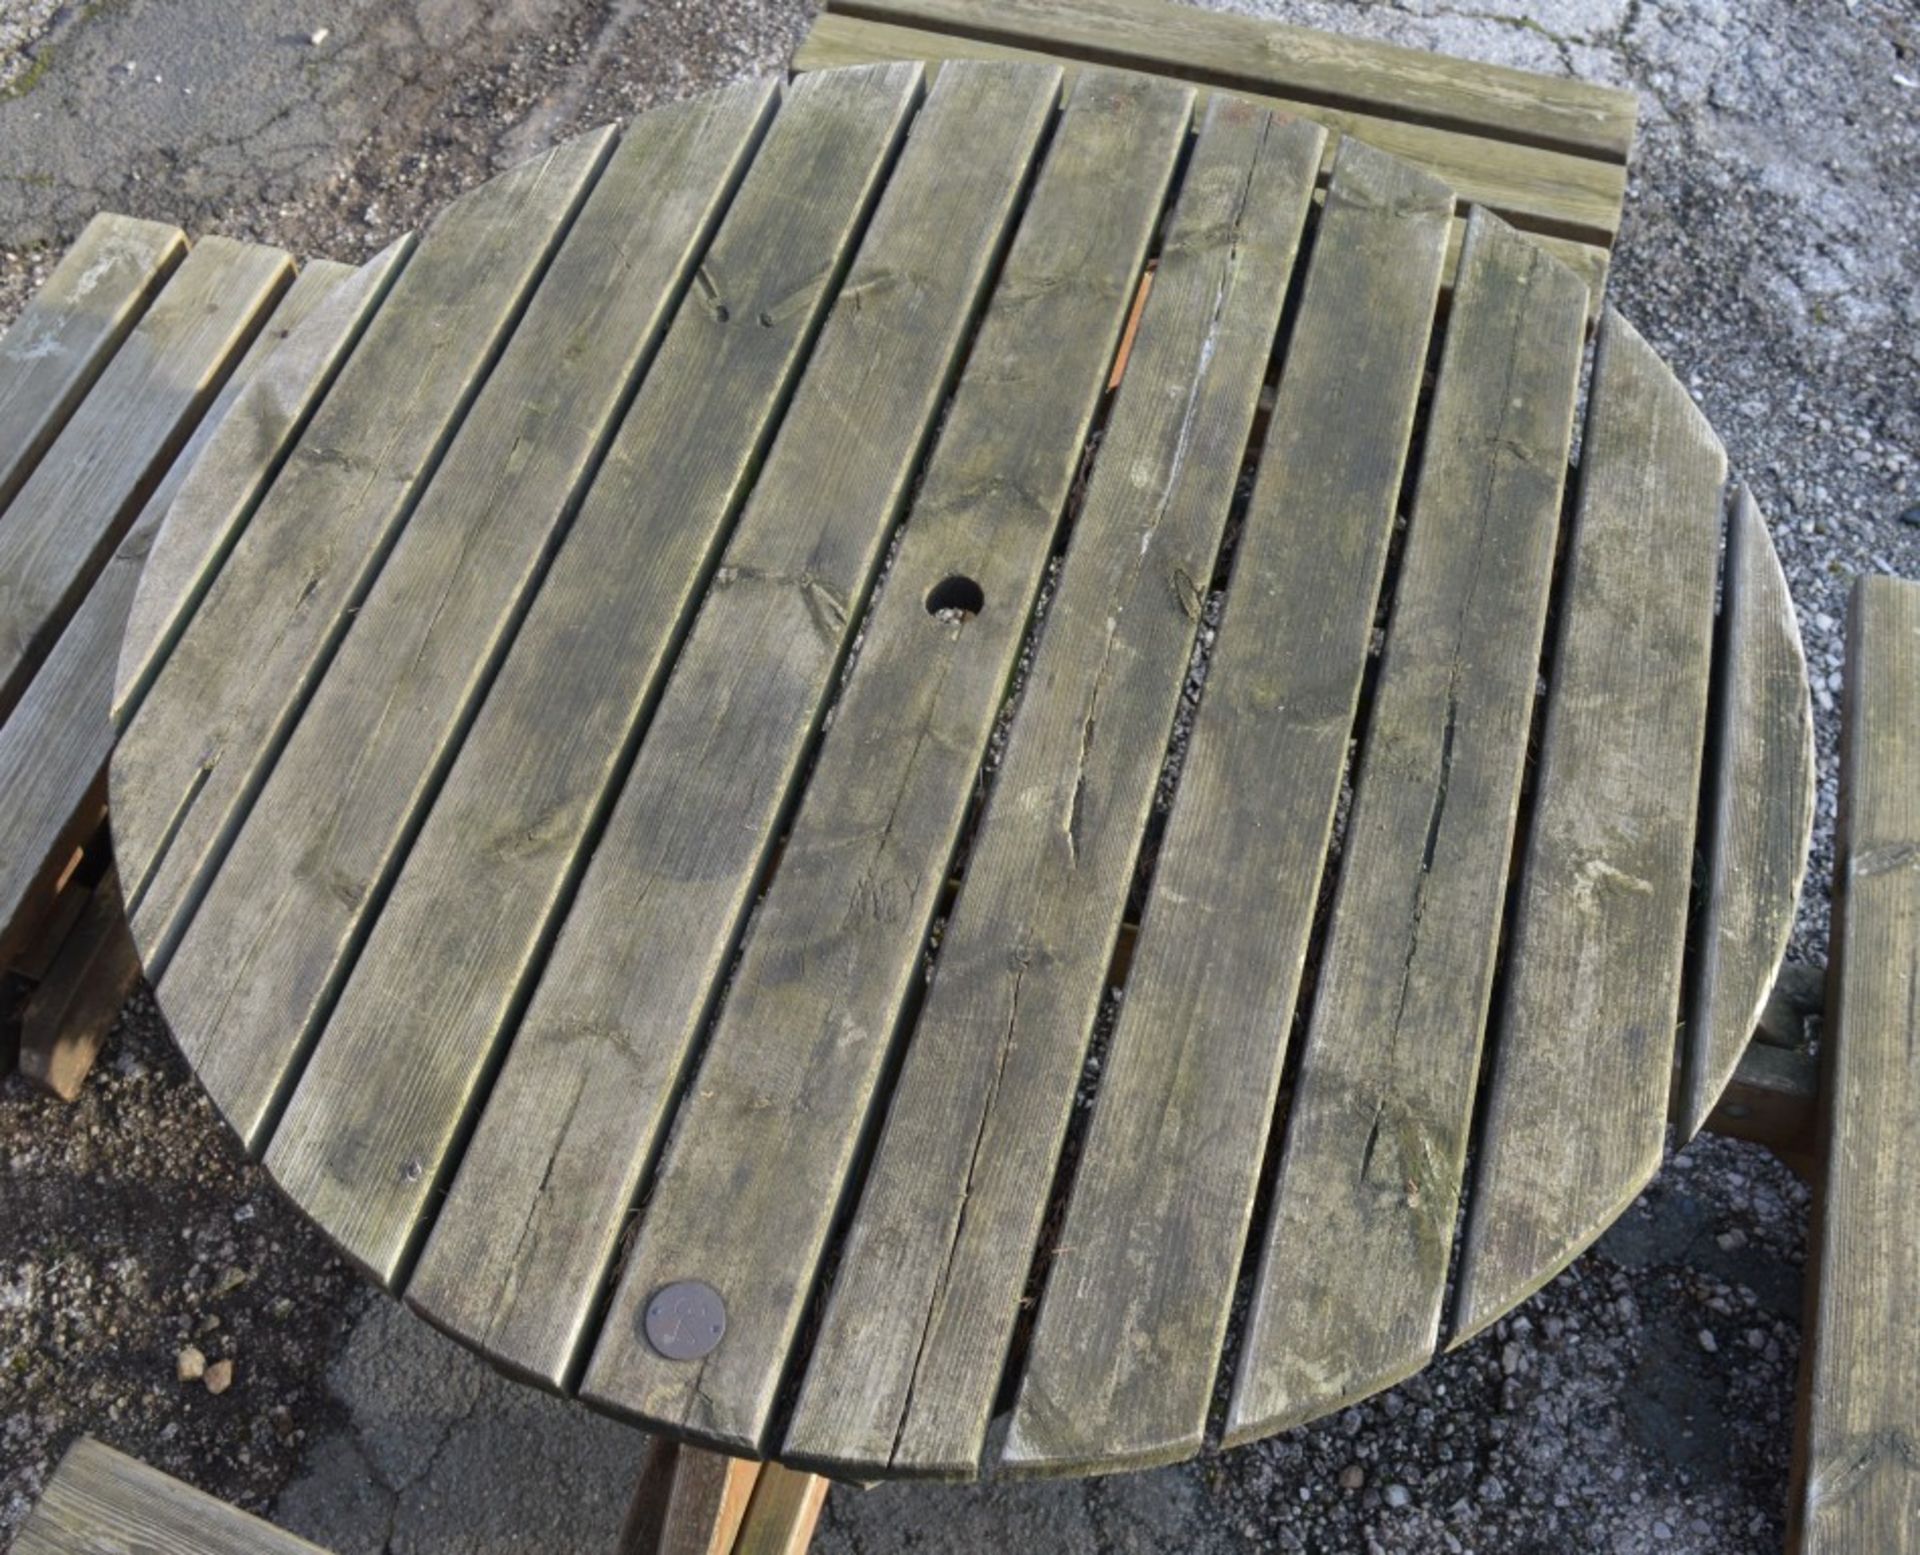 1 x Outdoor Picnic Pub Bench - Designed For 8 People To Be Sat Around a Circular Table - Ideal For - Image 2 of 3